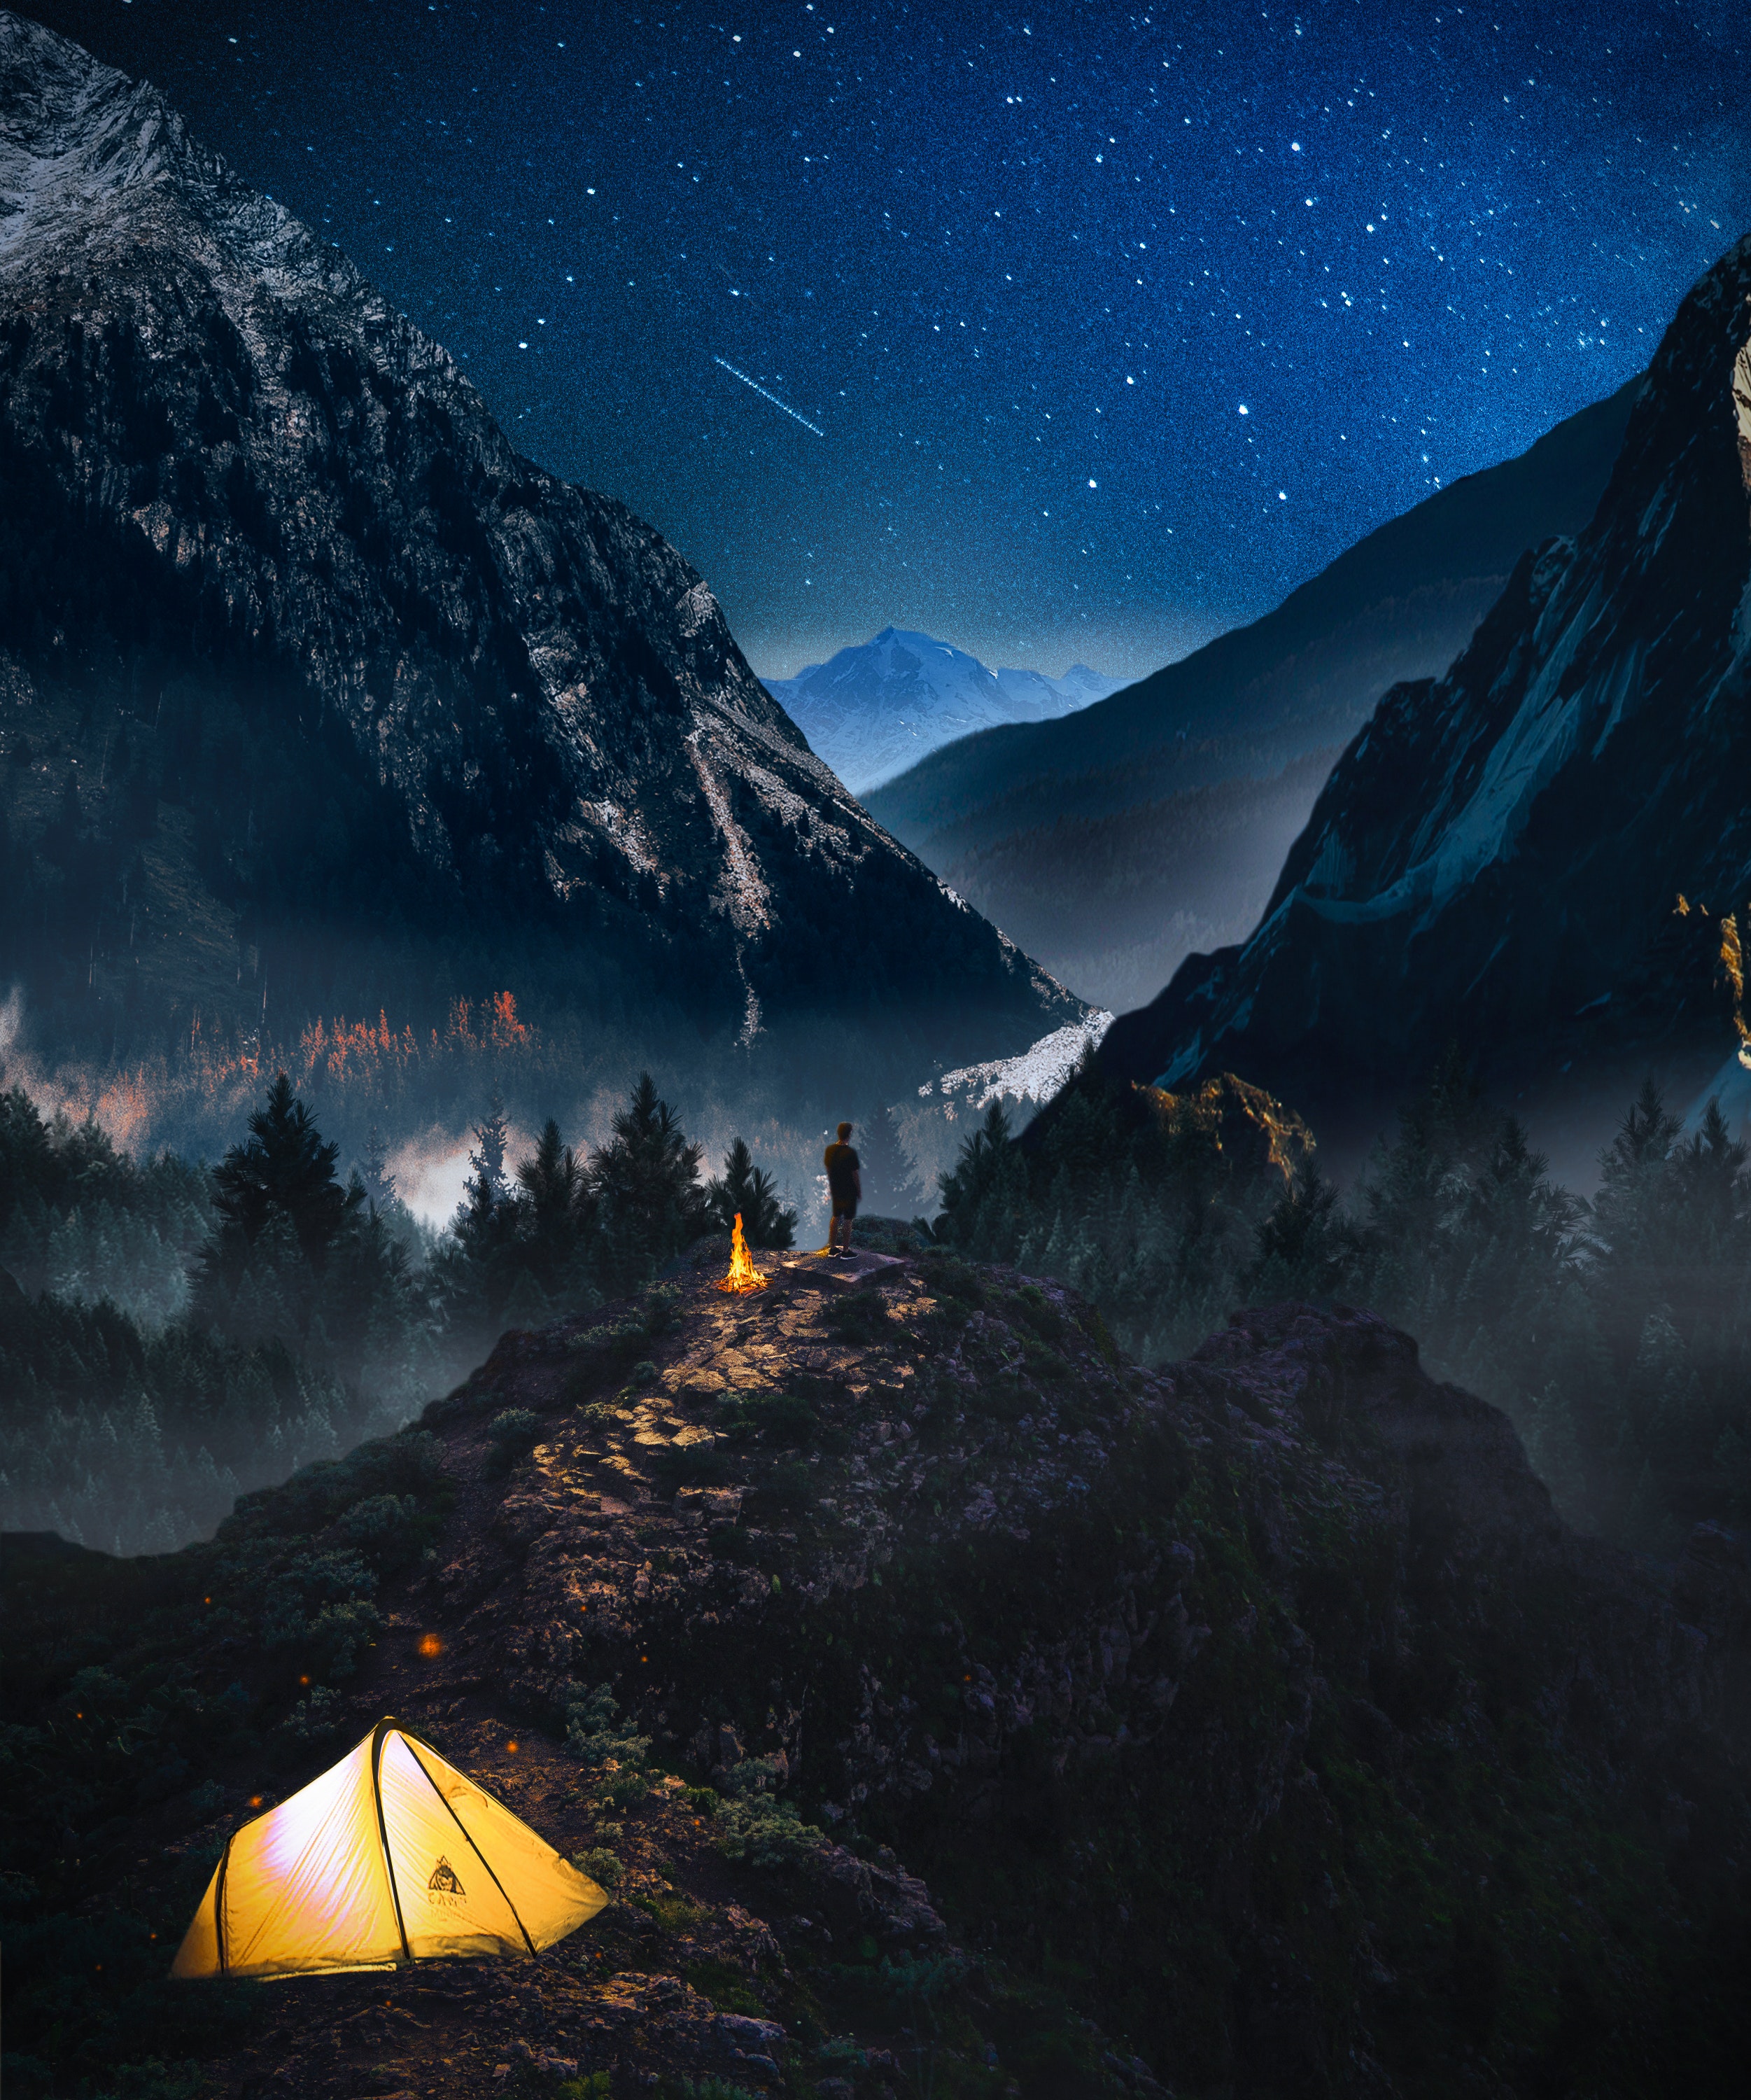 camping, starry sky, loneliness, photoshop, campsite, mountains, nature